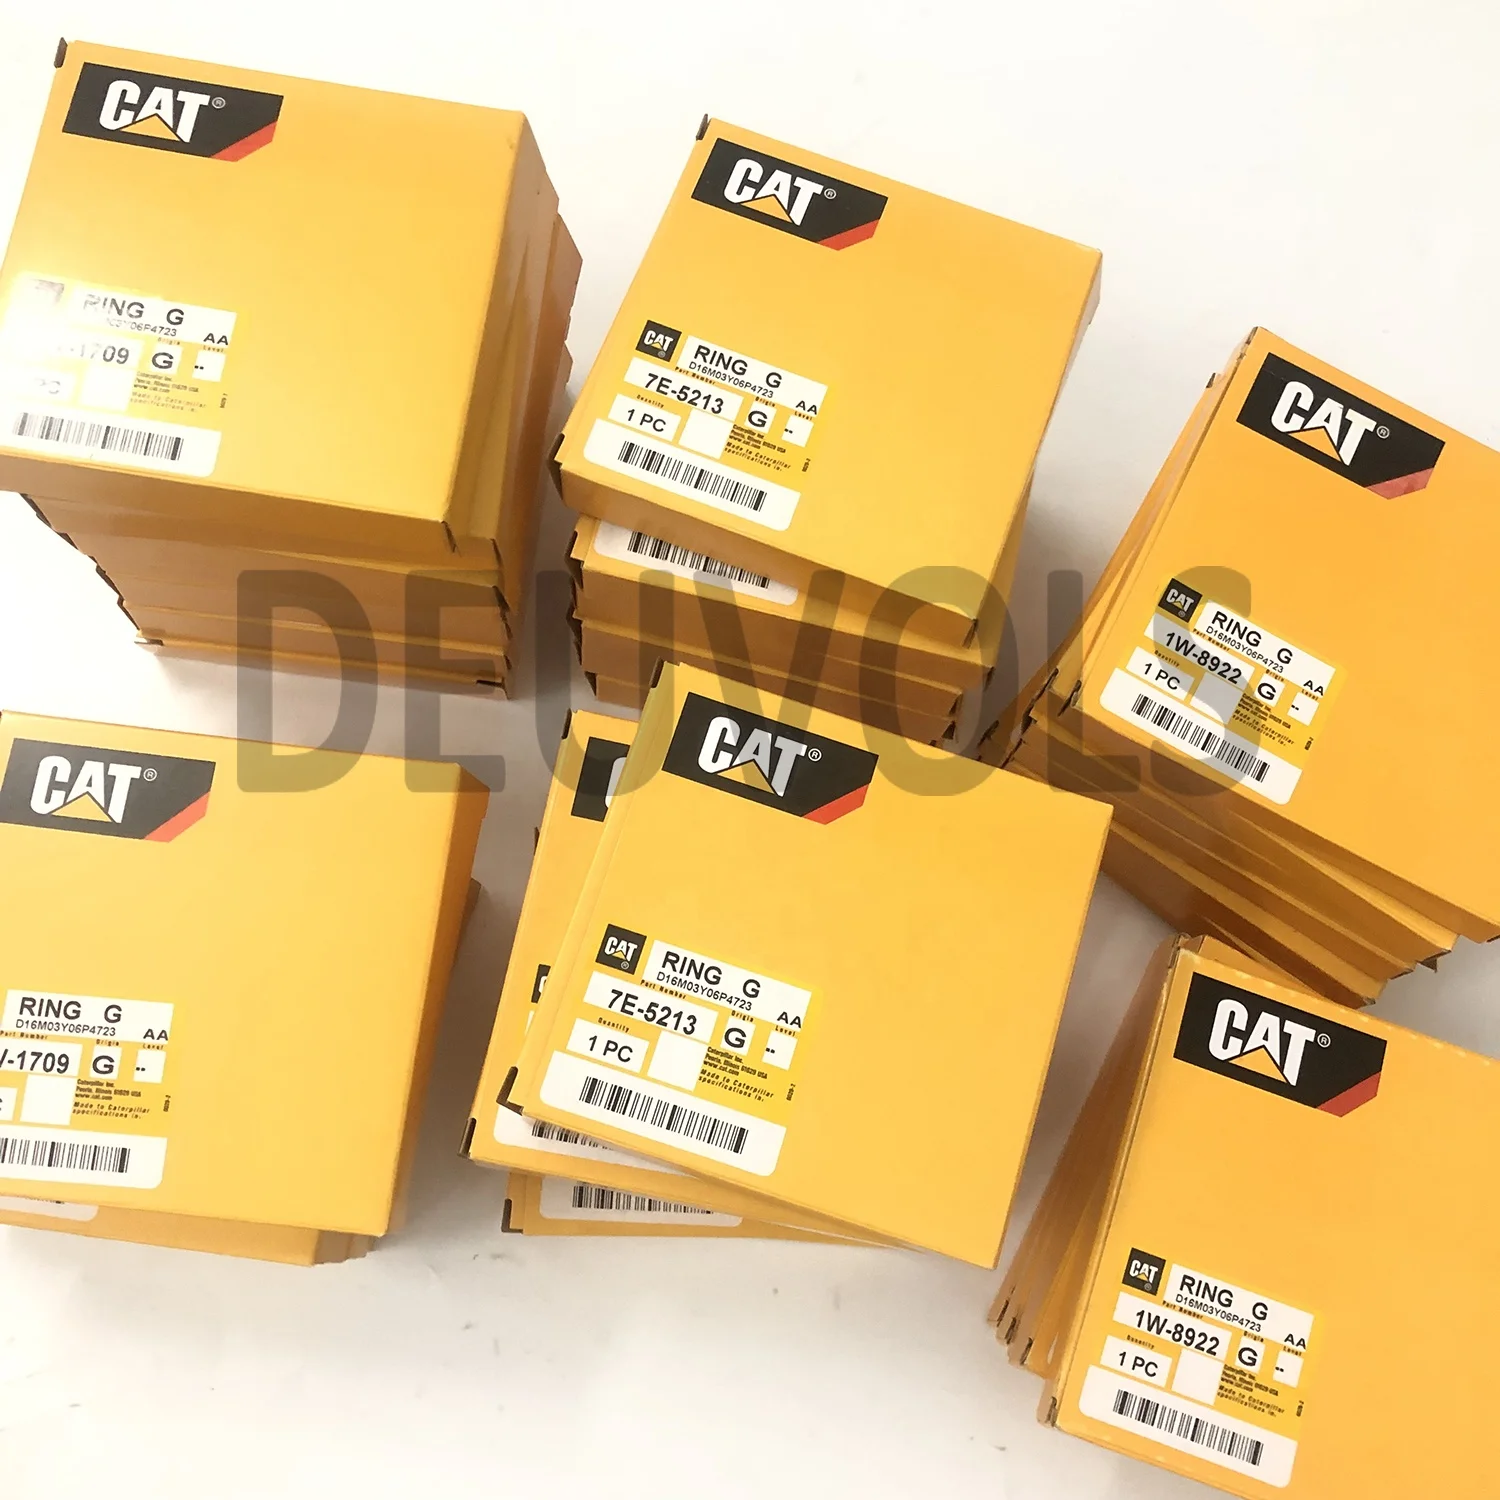 High Quality OEM Piston Ring Set 105mm STD 7E5213 For 3116 3114 Diesel Engines